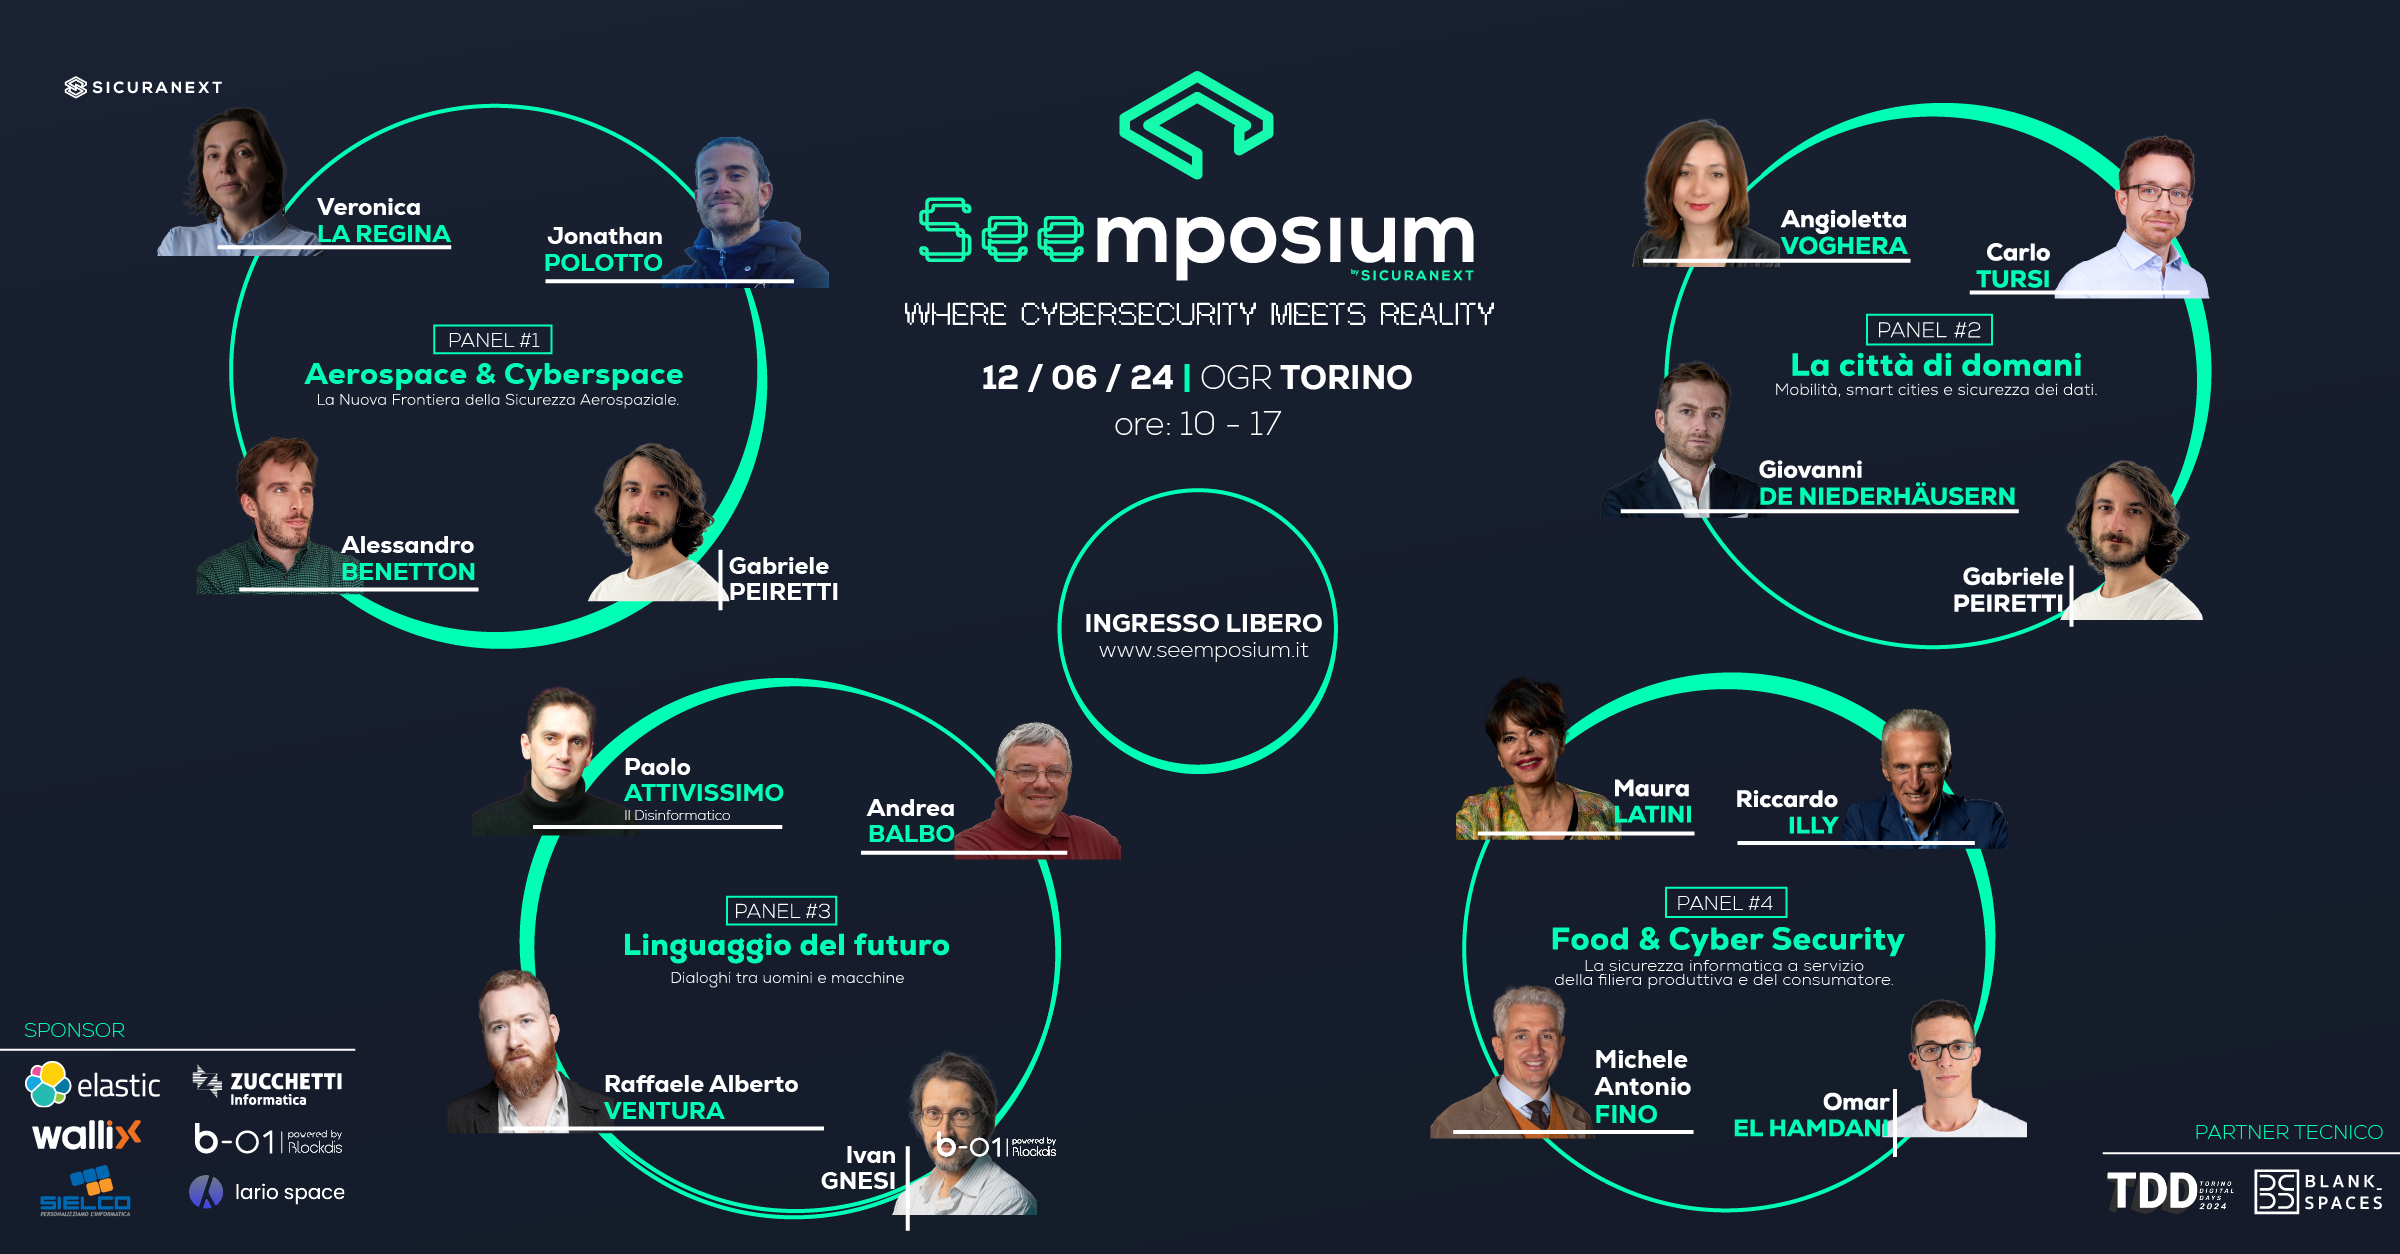 Seemposium - where cyber security meets reality